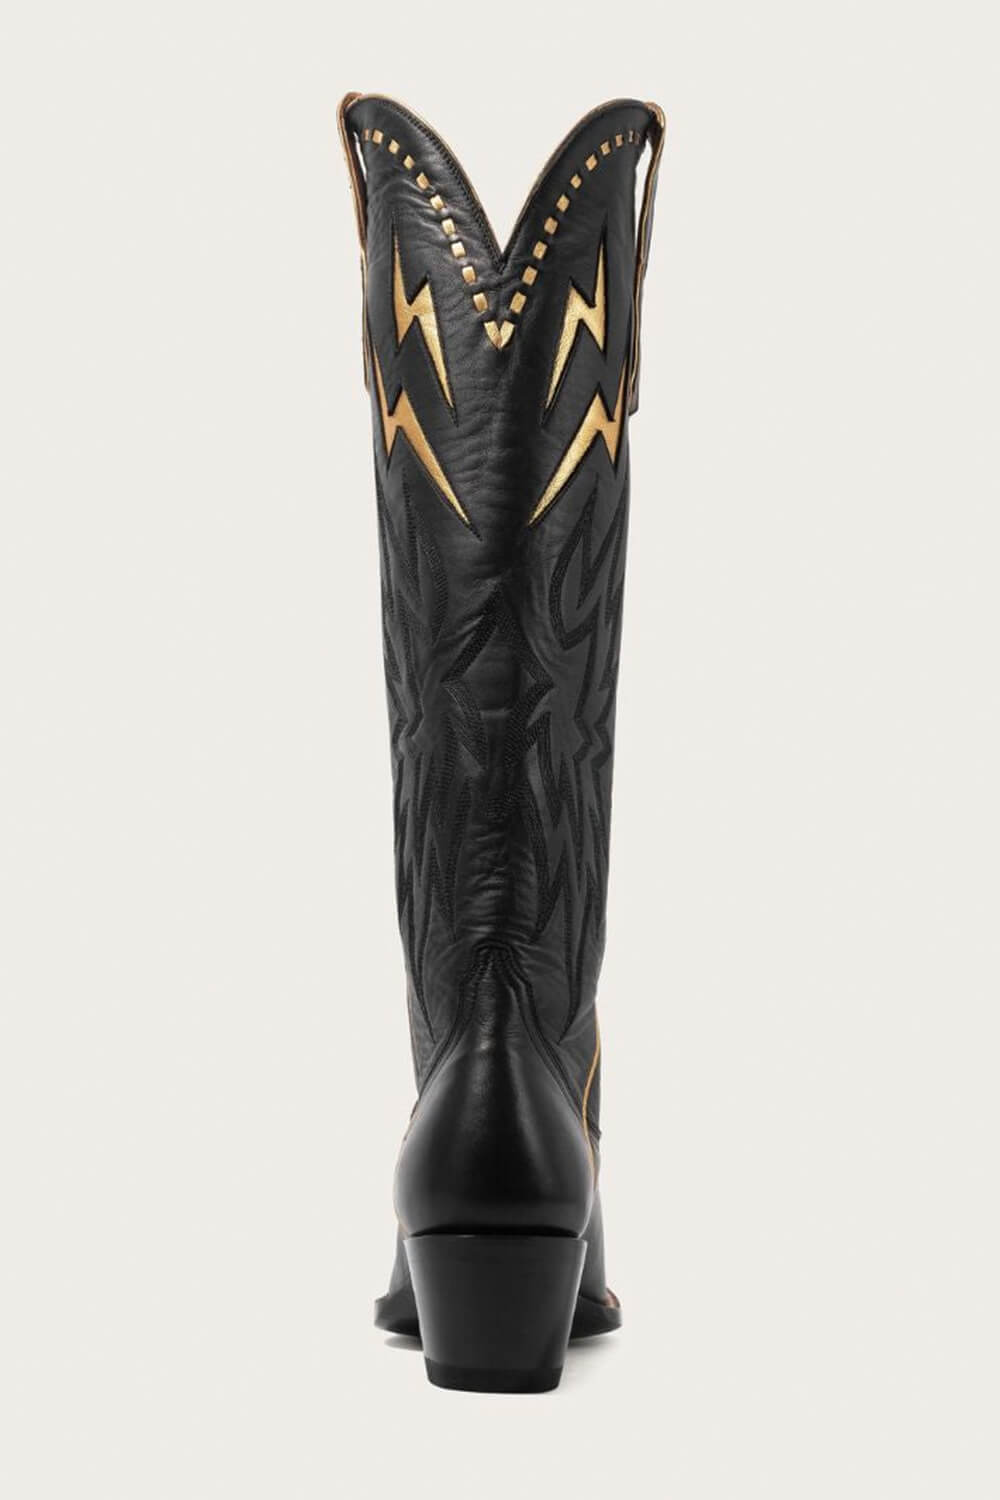 Lightning Embroidered Pointed Toe Long Western Knee High Block Heel Boot - Black & White